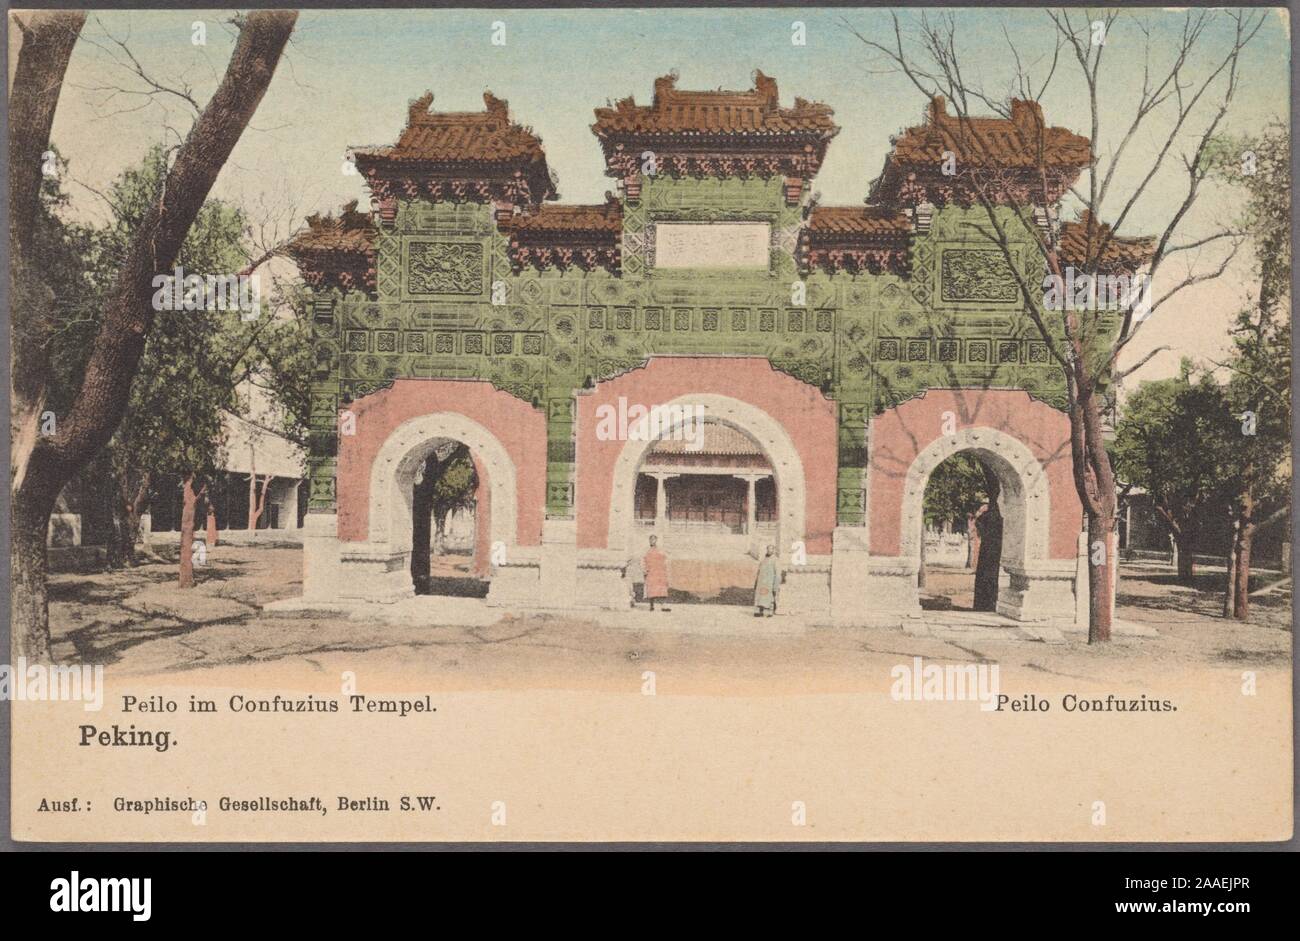 Illustrated postcard of The glazed paifang at the entrance of the Beijing Guozijian, also known as the Imperial Academy or Imperial College, near the Confucius Temple, Beijing, China, published by Graphische Gesellschaft, 1905. From the New York Public Library. () Stock Photo